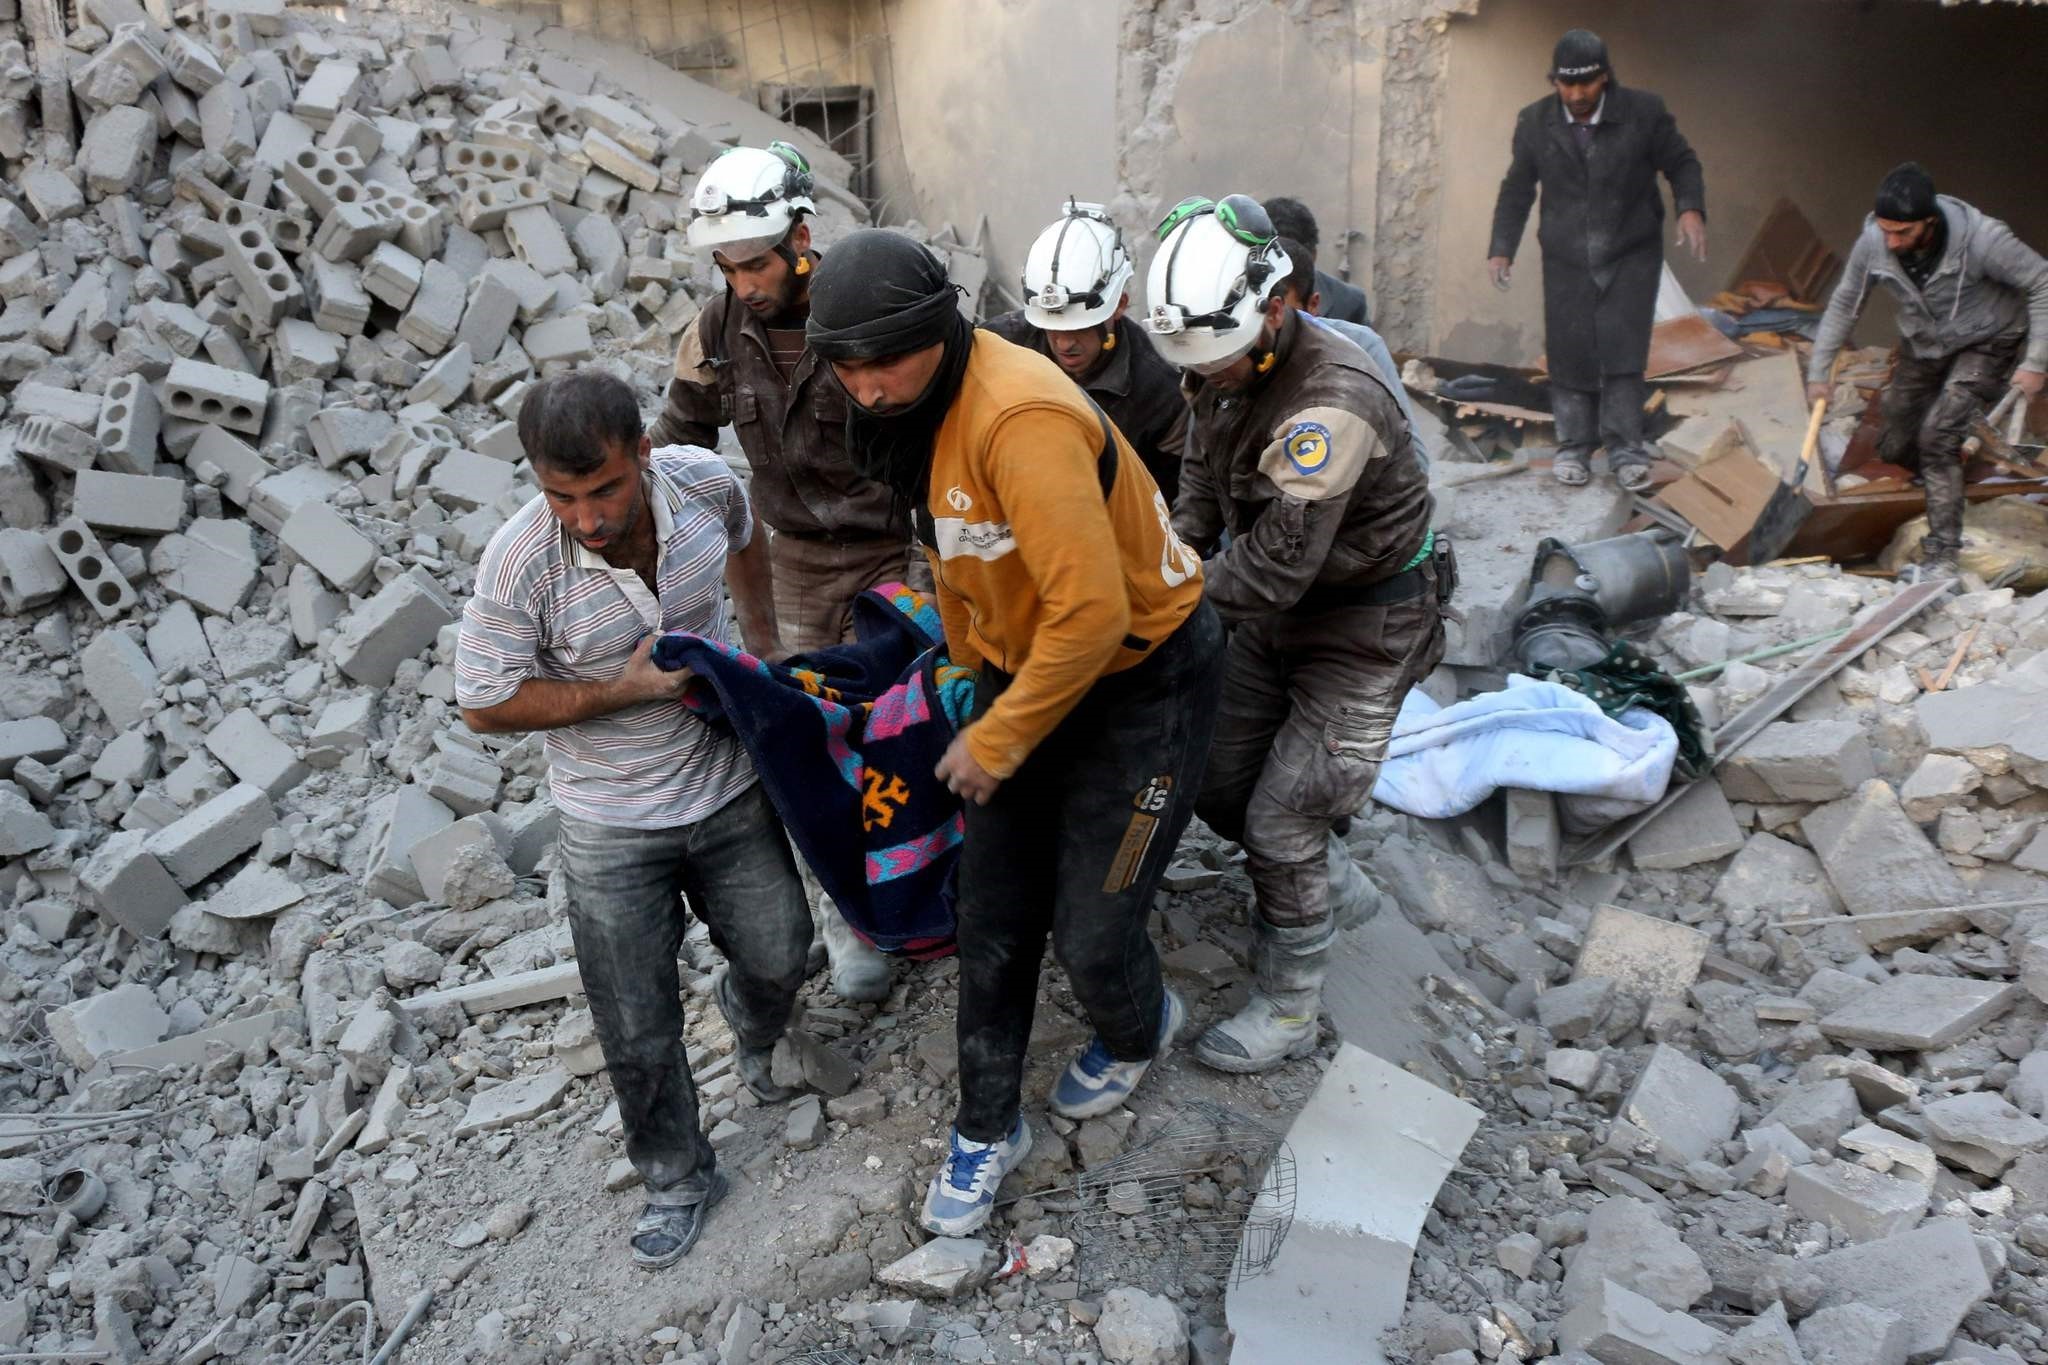 Syrian civil defence volunteers evacuate a victim from the rubble of a building following reported airstrikes on Aleppo's rebel-held district of al-Hamra on November 20, 2016. (AFP PHOTO)